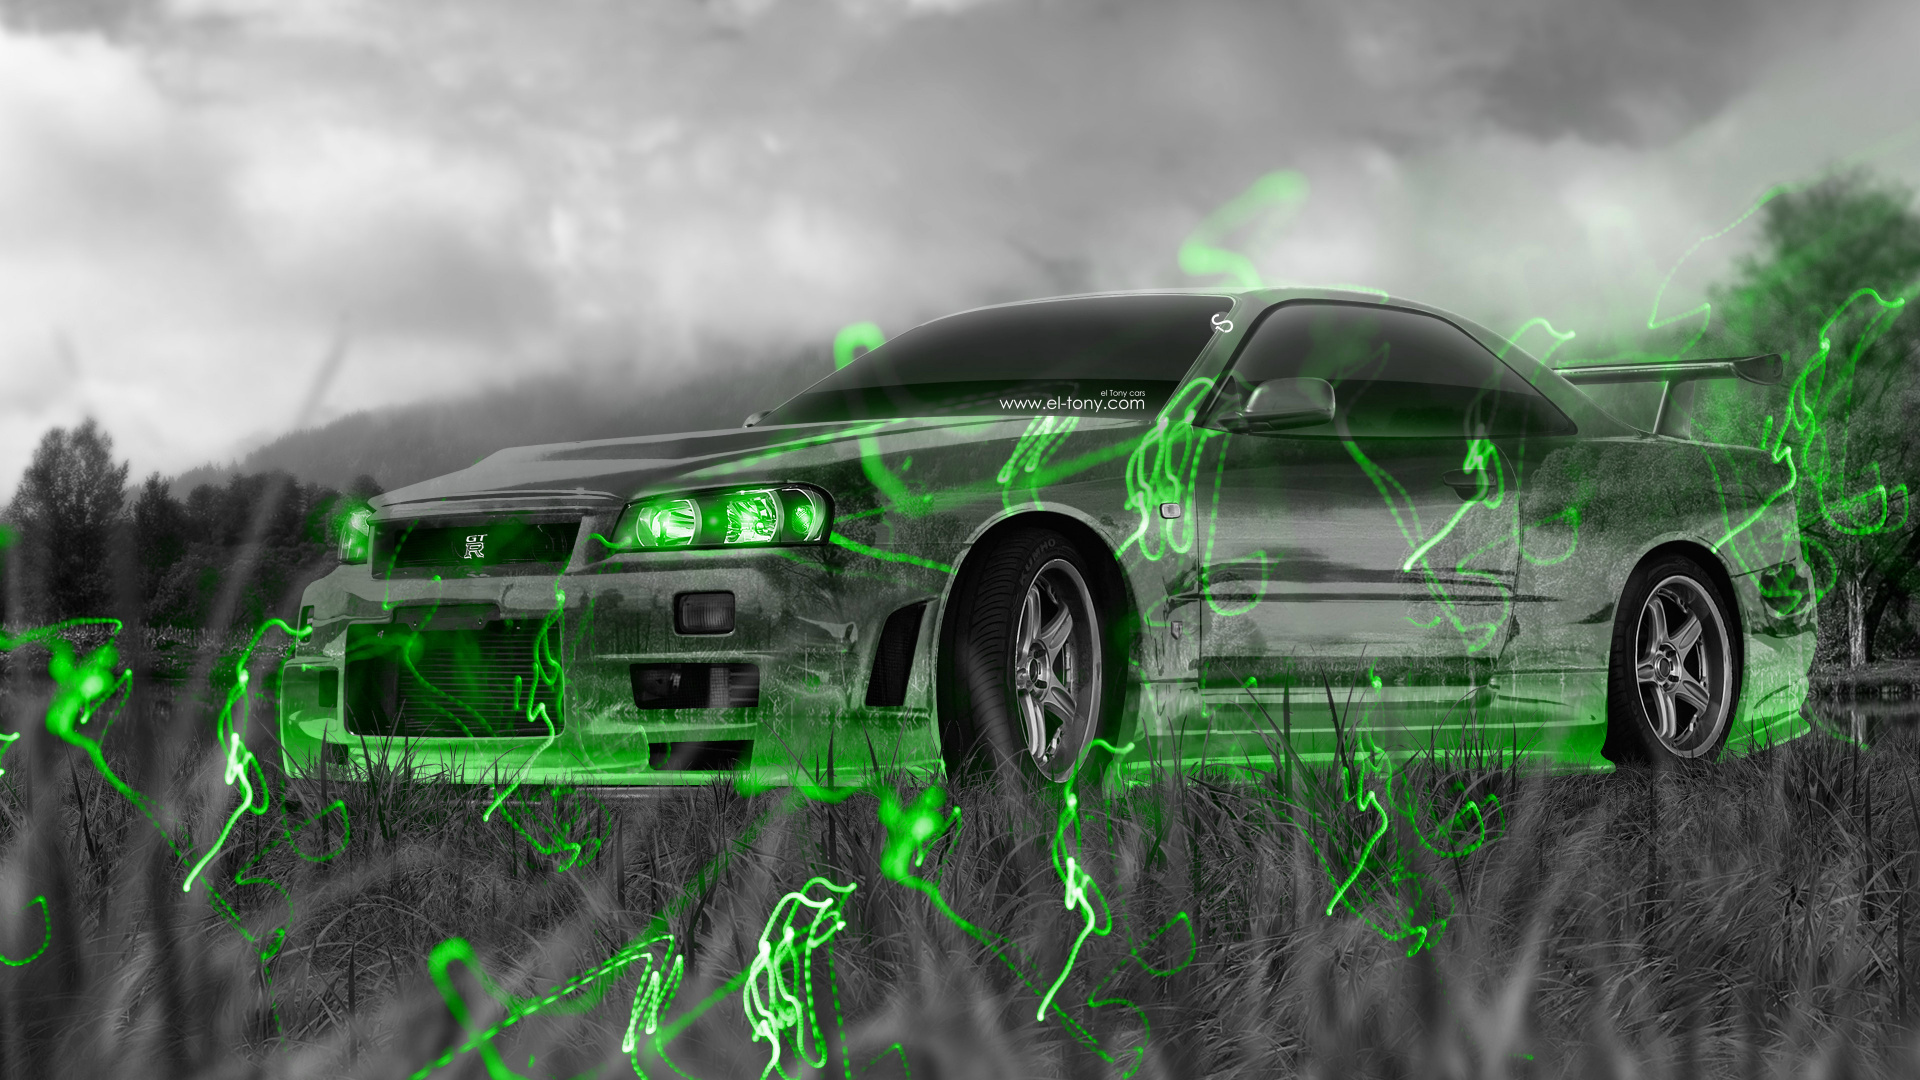 Black Bmw m 3 Coupe on Green Grass Field. Wallpaper in 1920x1080 Resolution